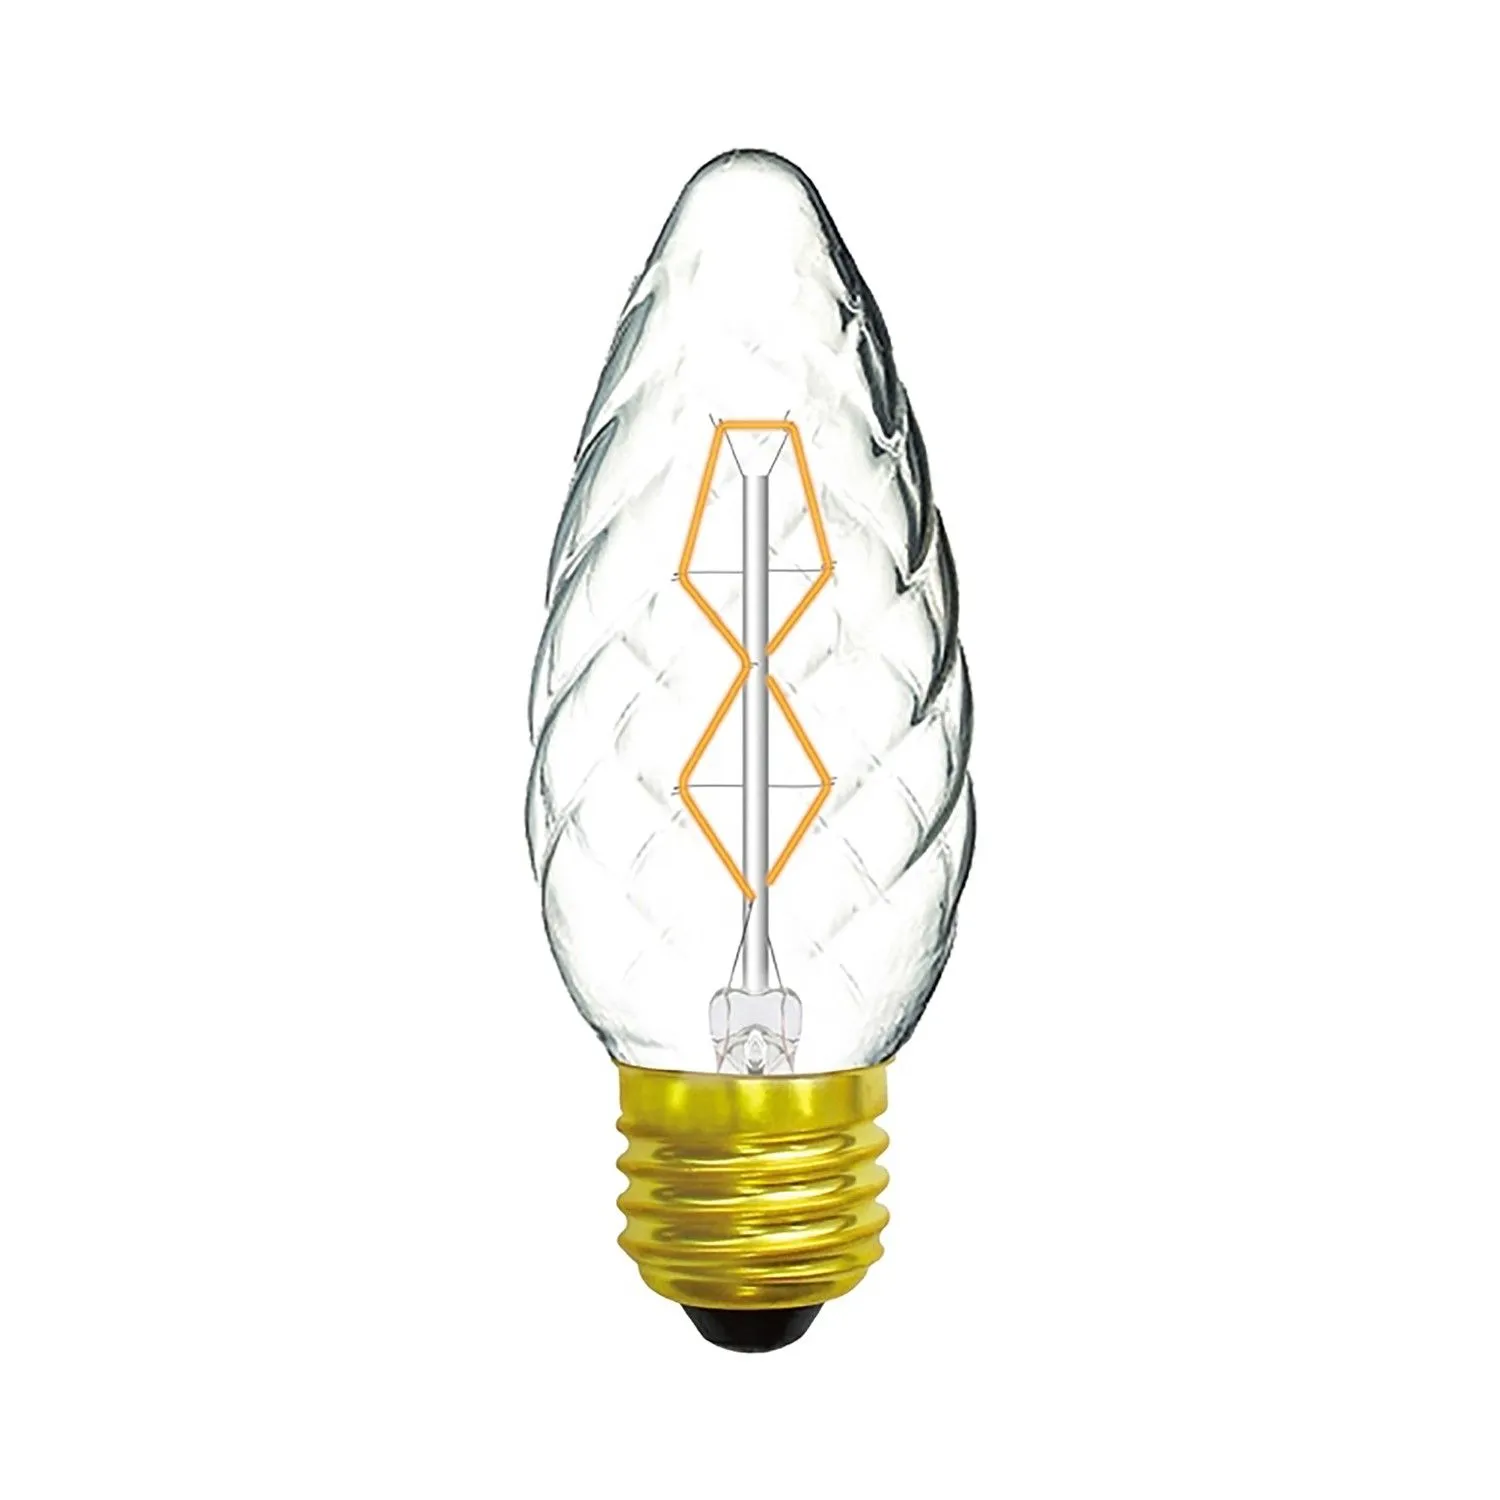 Rustica Candle 45mm S Twisted E27 Clear 60W (100 10)